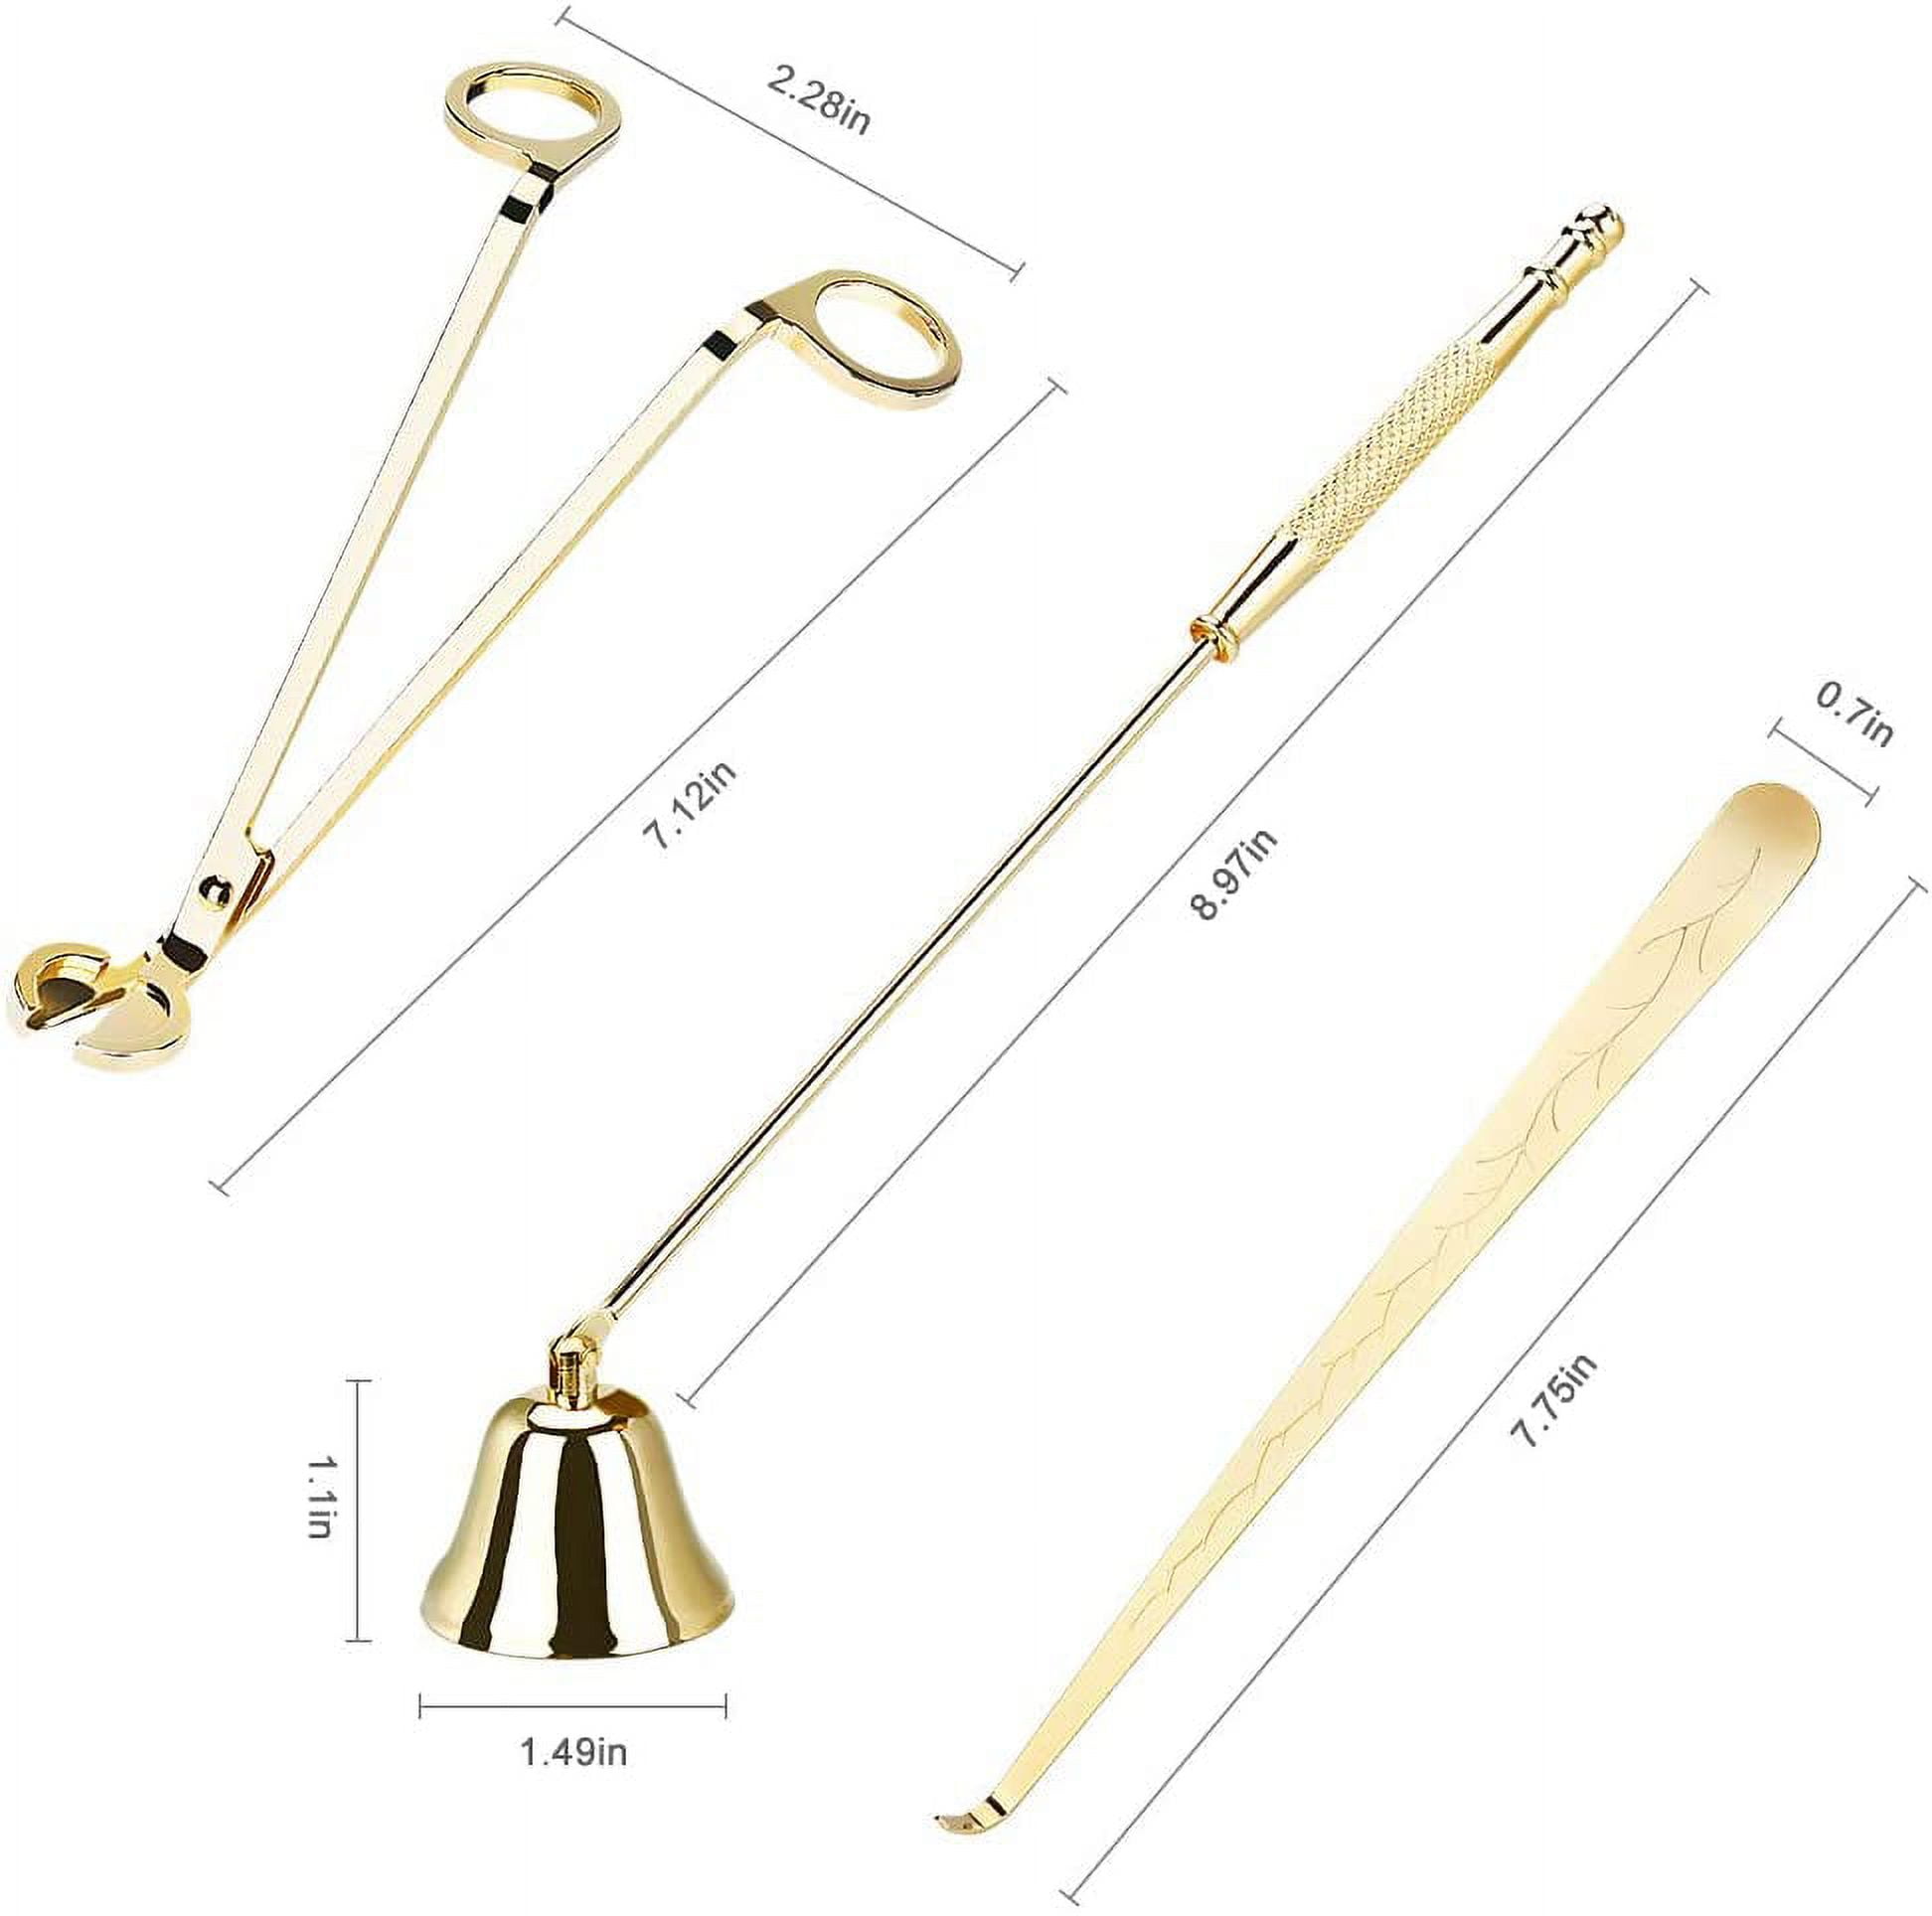 Candle Wick Dipper vs Snuffer and Types of Snuffers – Honey Candles Canada